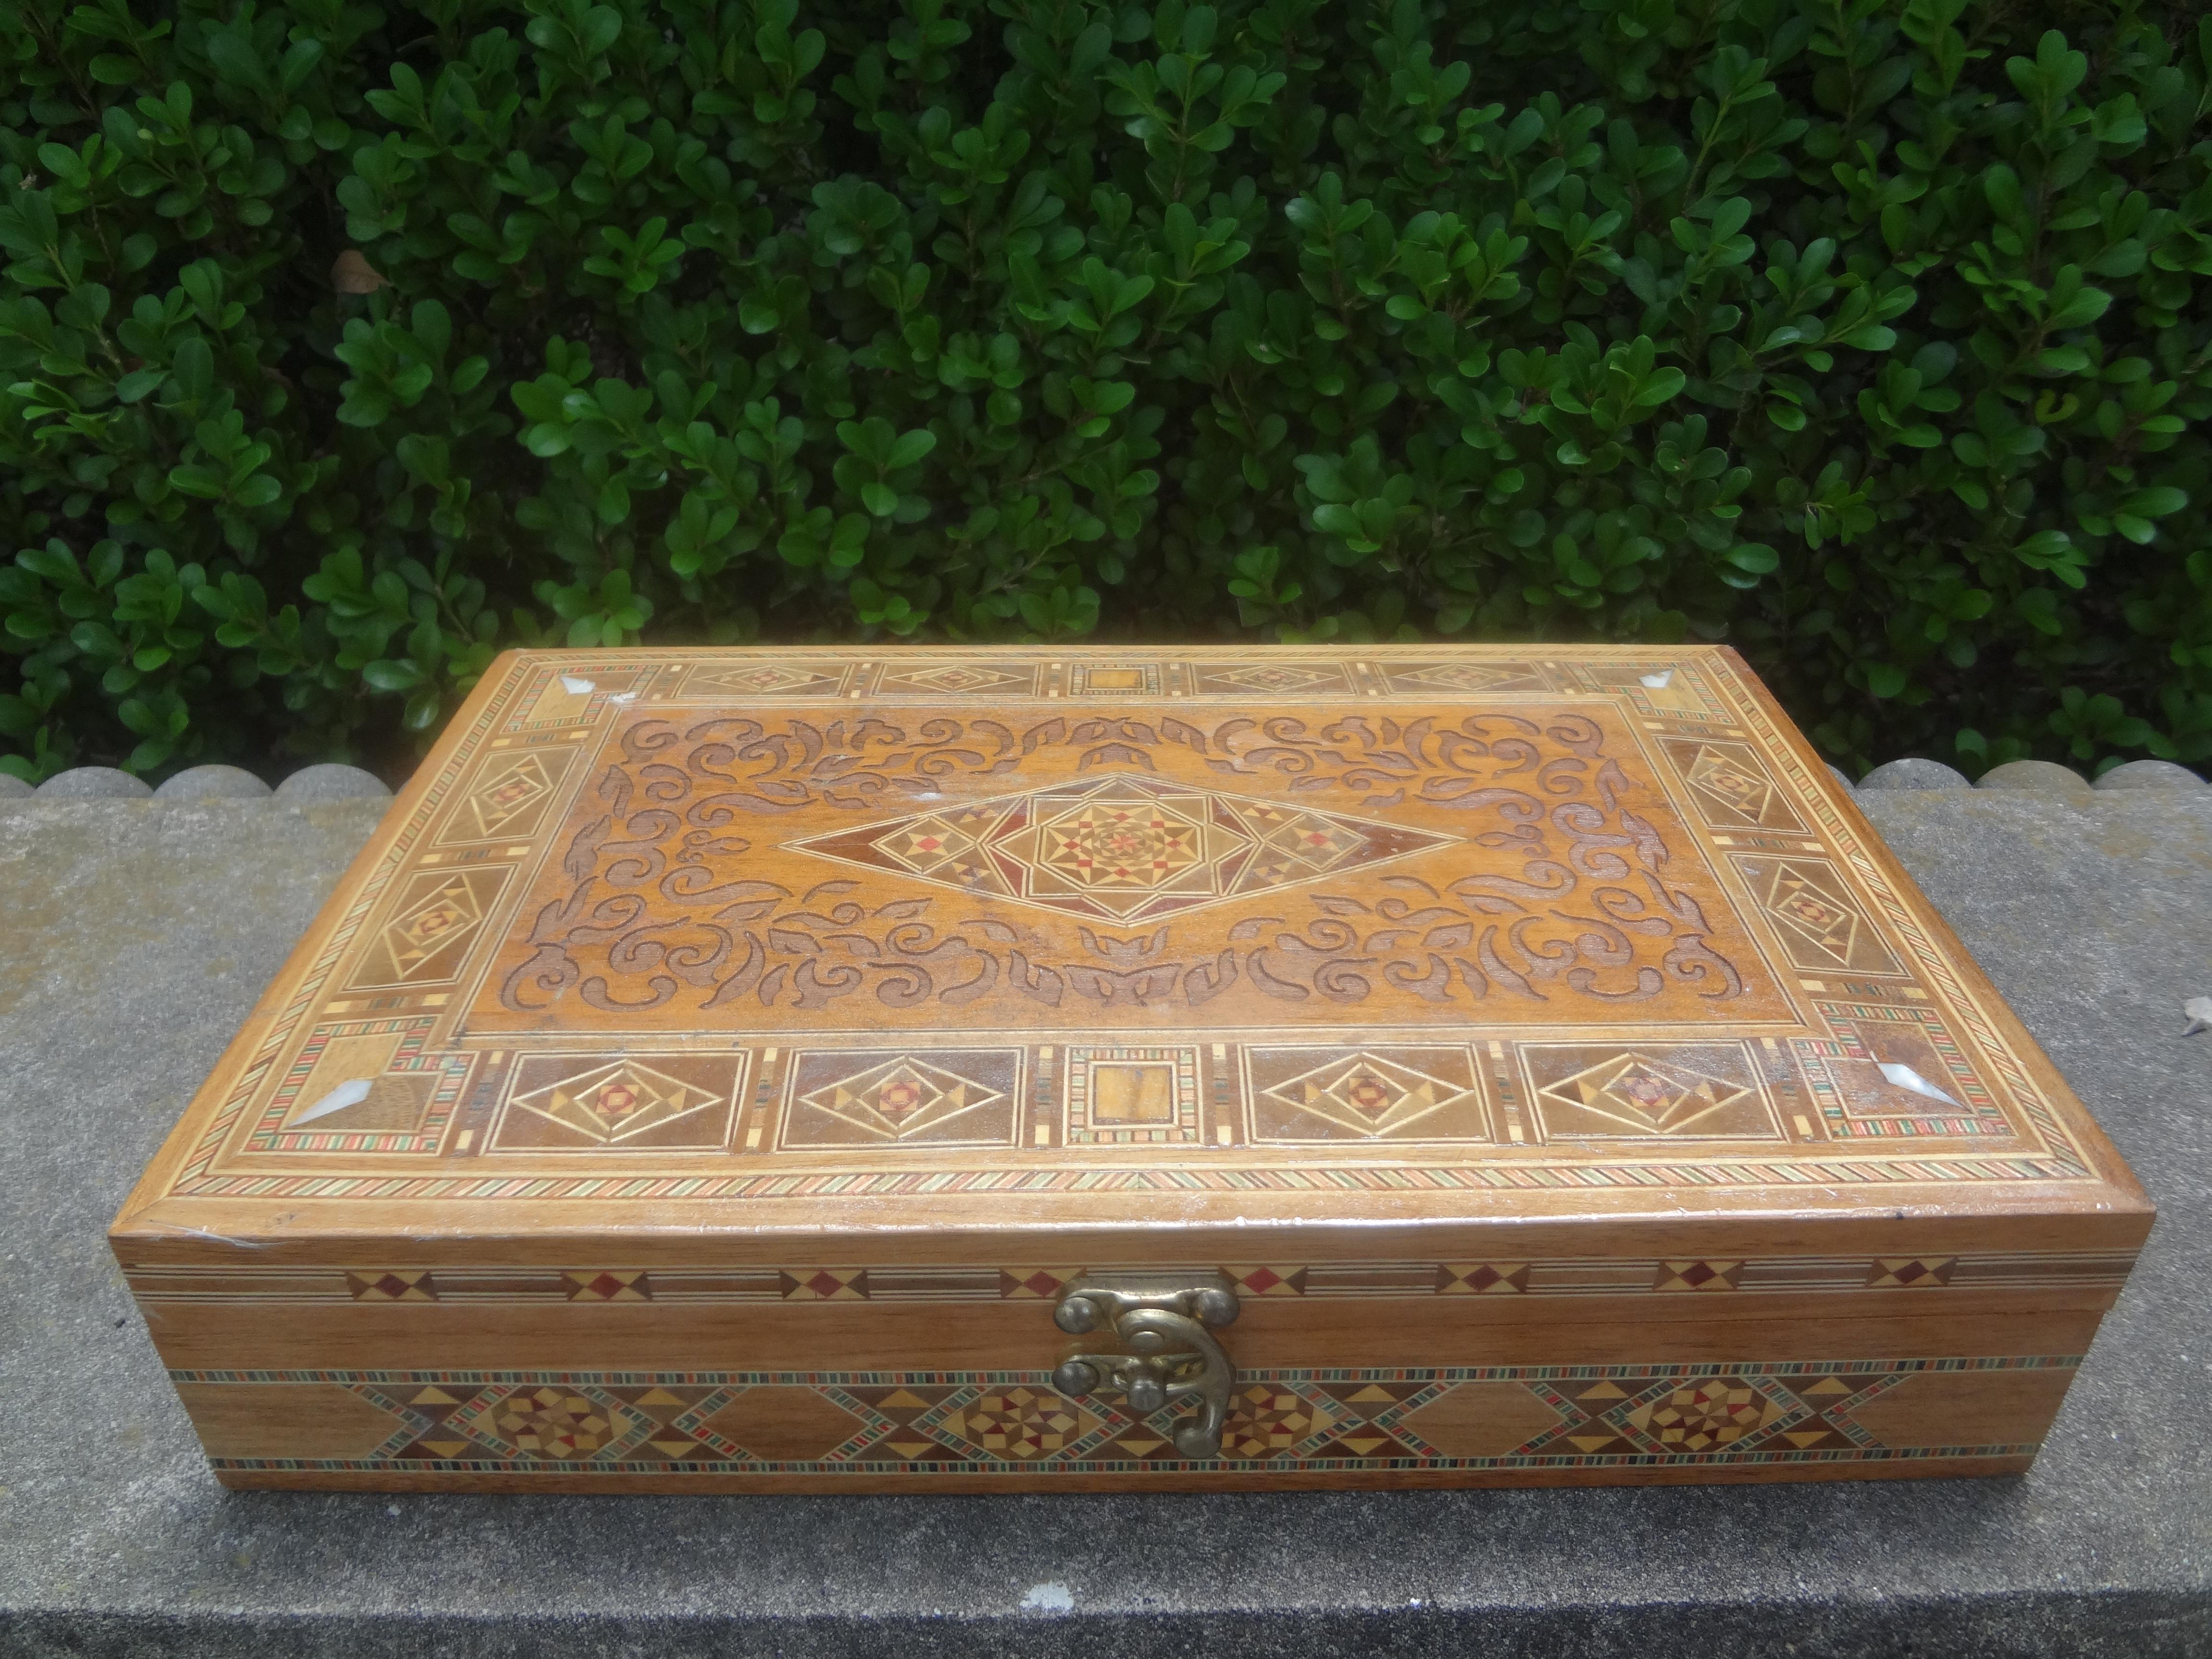 Vintage rectangular Moroccan inlaid decorative box. This unusual Moroccan or Middle Eastern Arabesque box of mixed inlaid woods in a mosaic pattern is the perfect coffee table accessory.